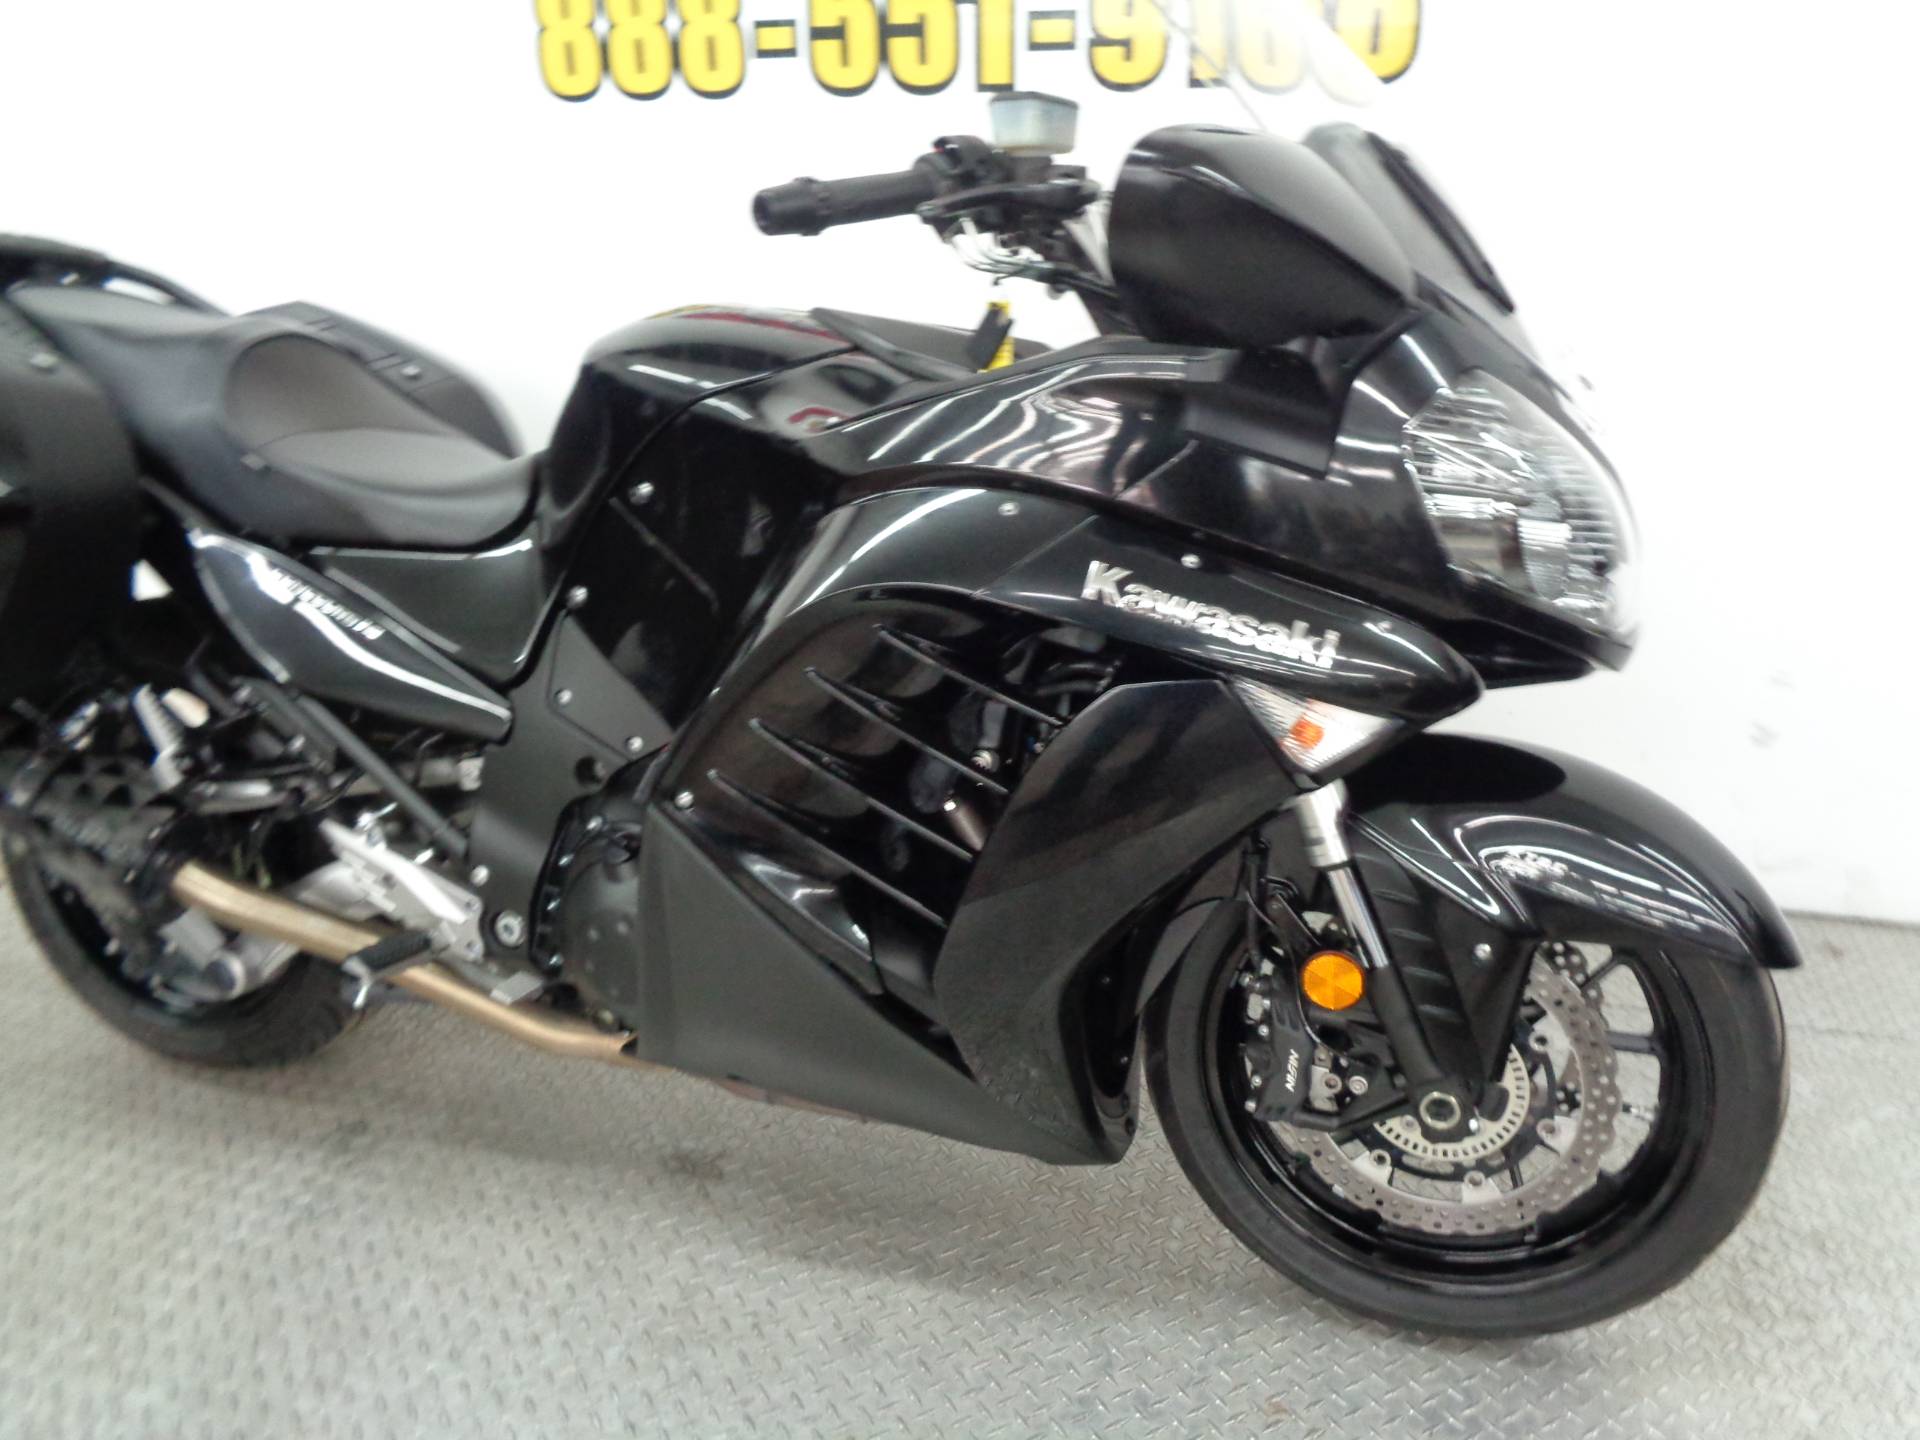 Used 2014 Kawasaki Concours® 14 ABS Motorcycles in Tulsa, OK | Stock